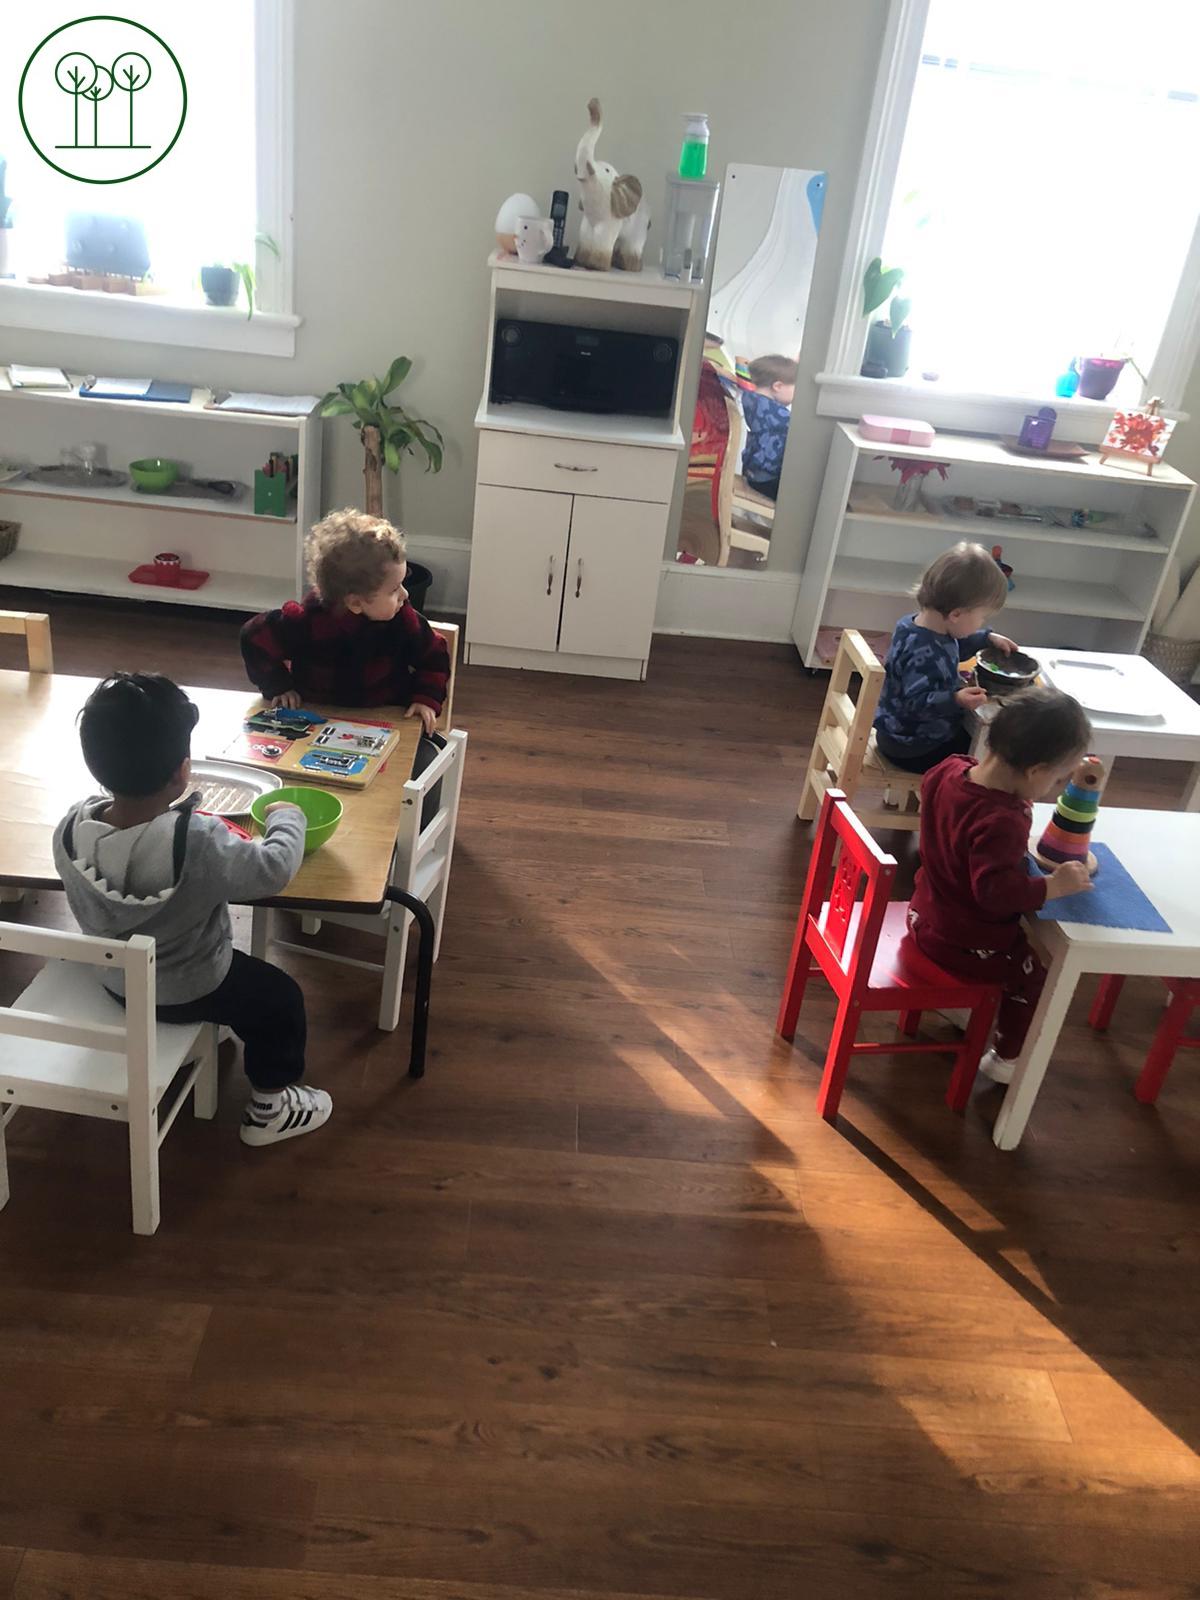 The Toddler Room at Learning Tree Montessori